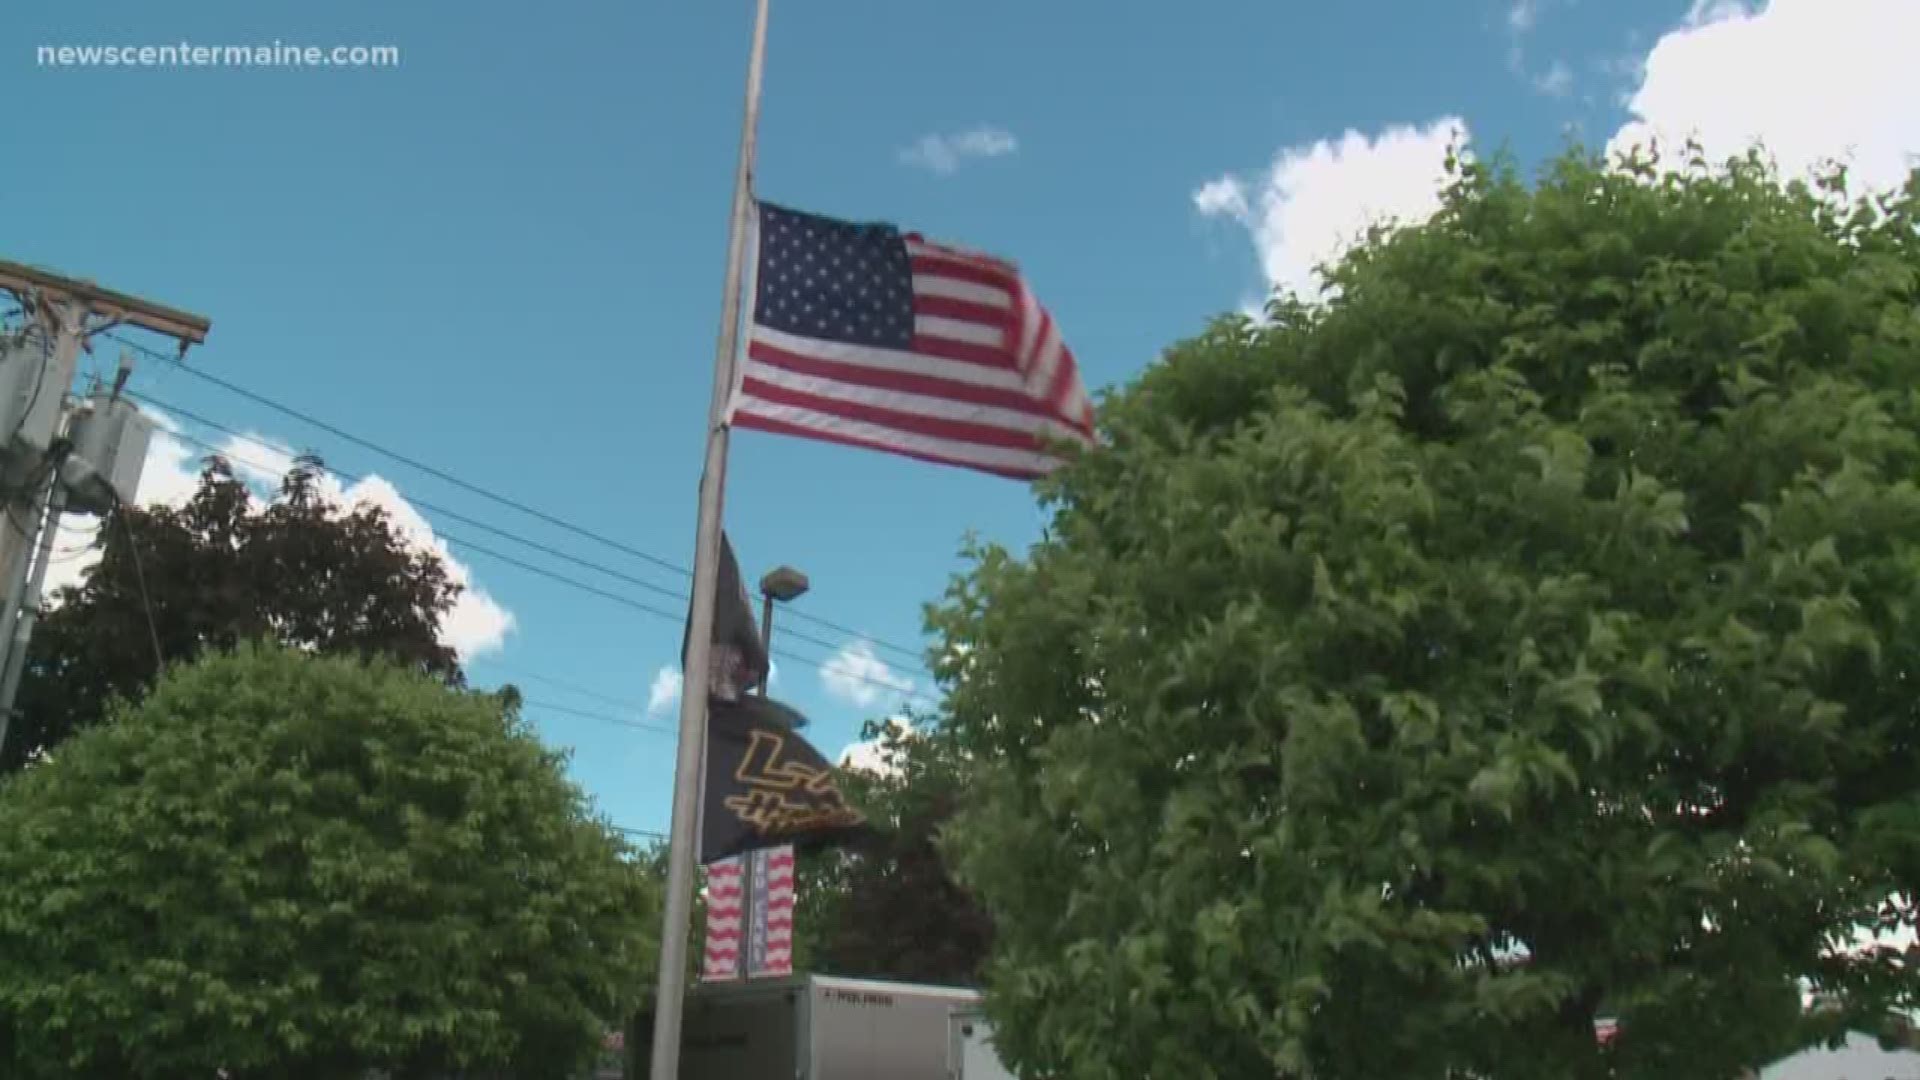 The L-A Harley Davidson store flew its flags at half-staff Saturday to honor the lives lost in Randolph's crash.